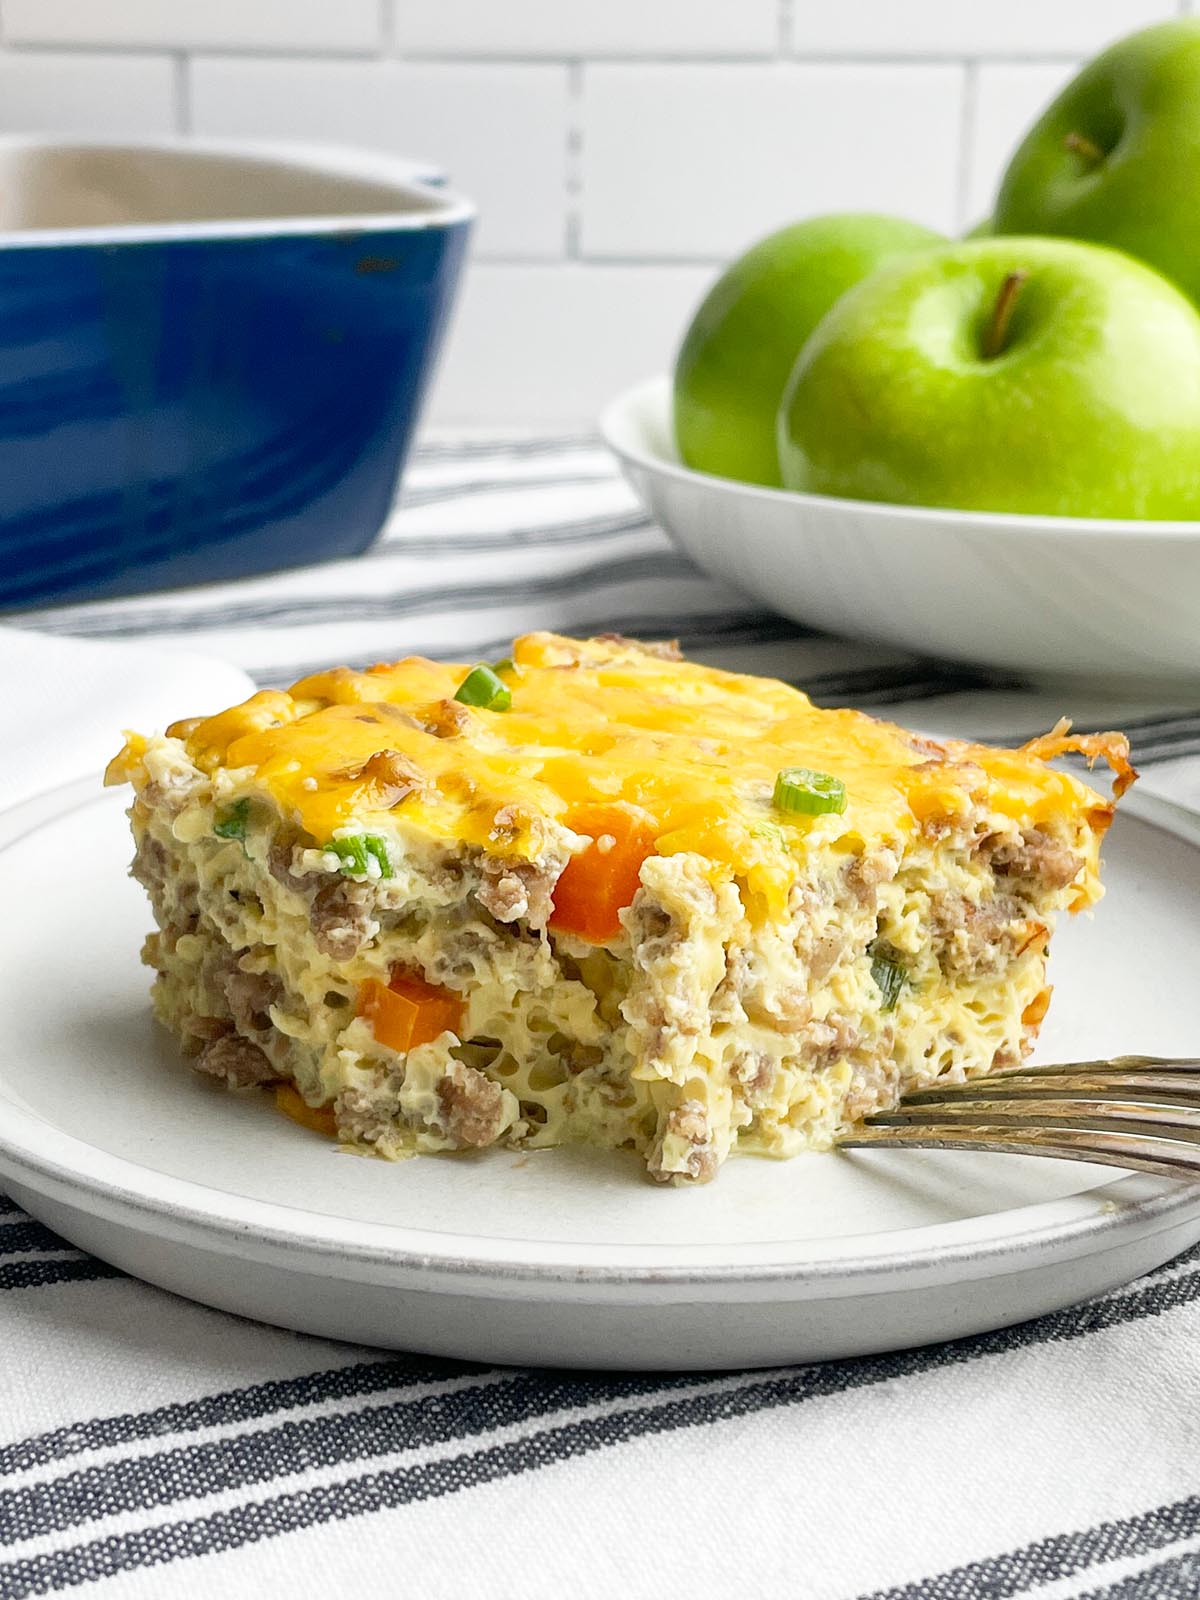 piece of sausage egg bake on a white plate with casserole dish and green apples in background.